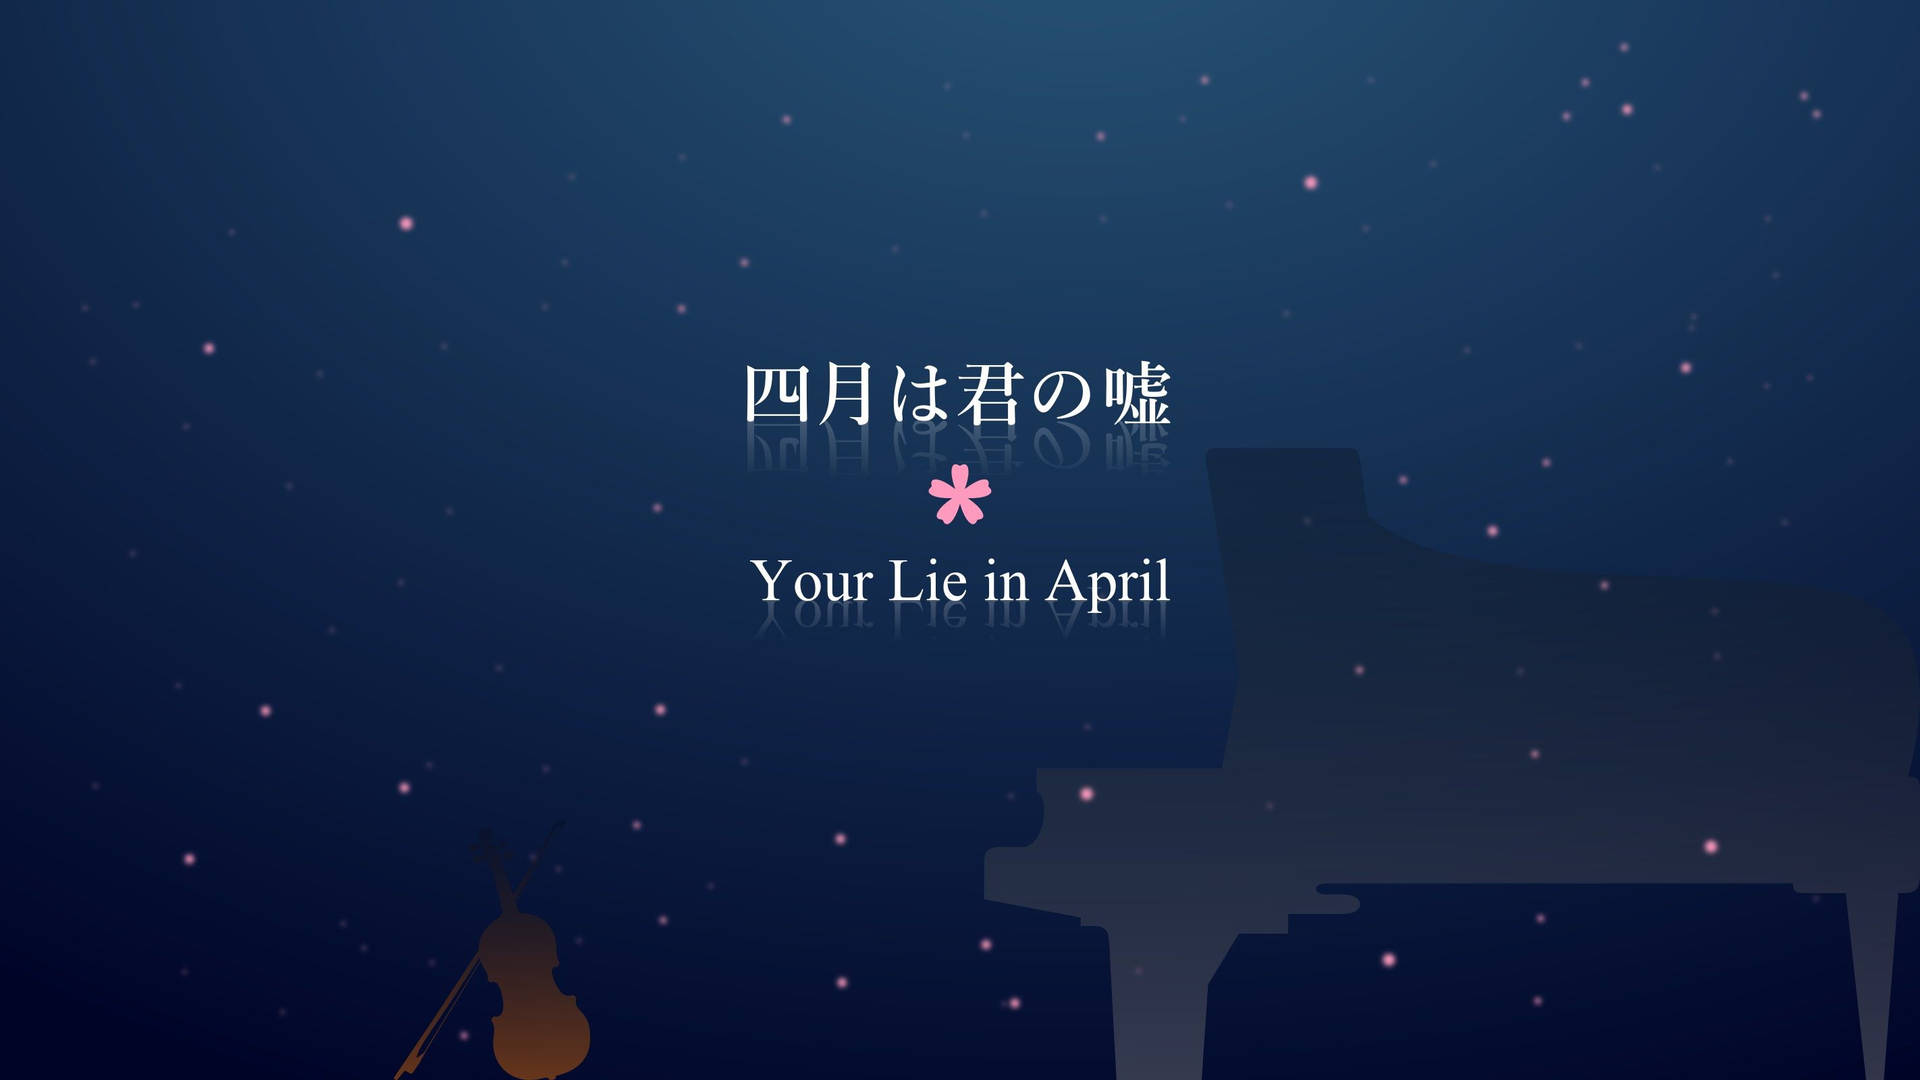 Delightful Moments Of April - Your Lie In April Background